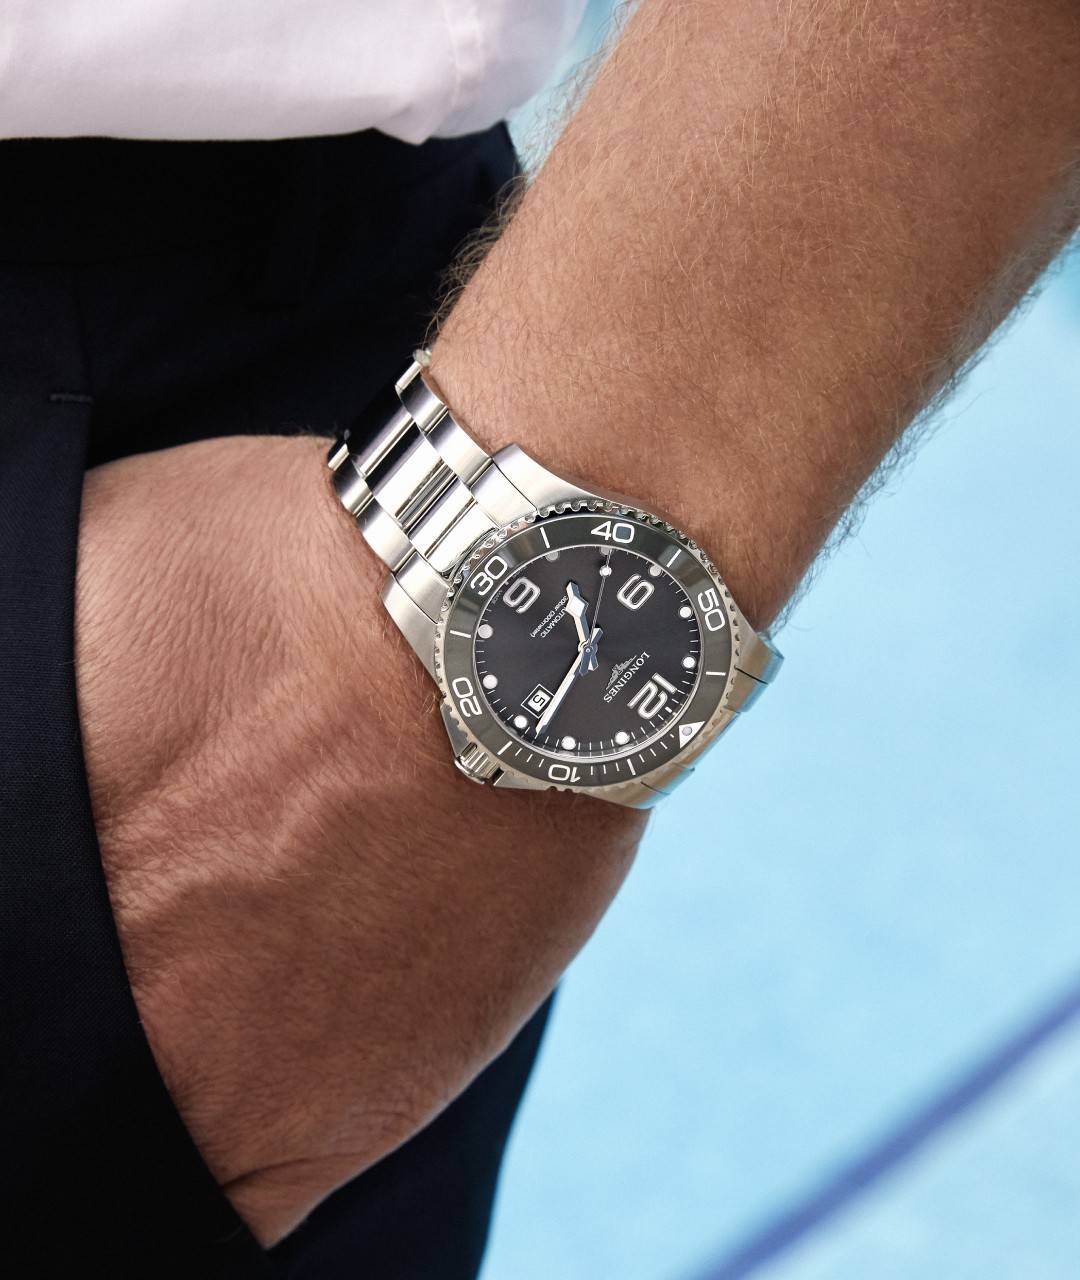 HydroConquest Collection from Longines